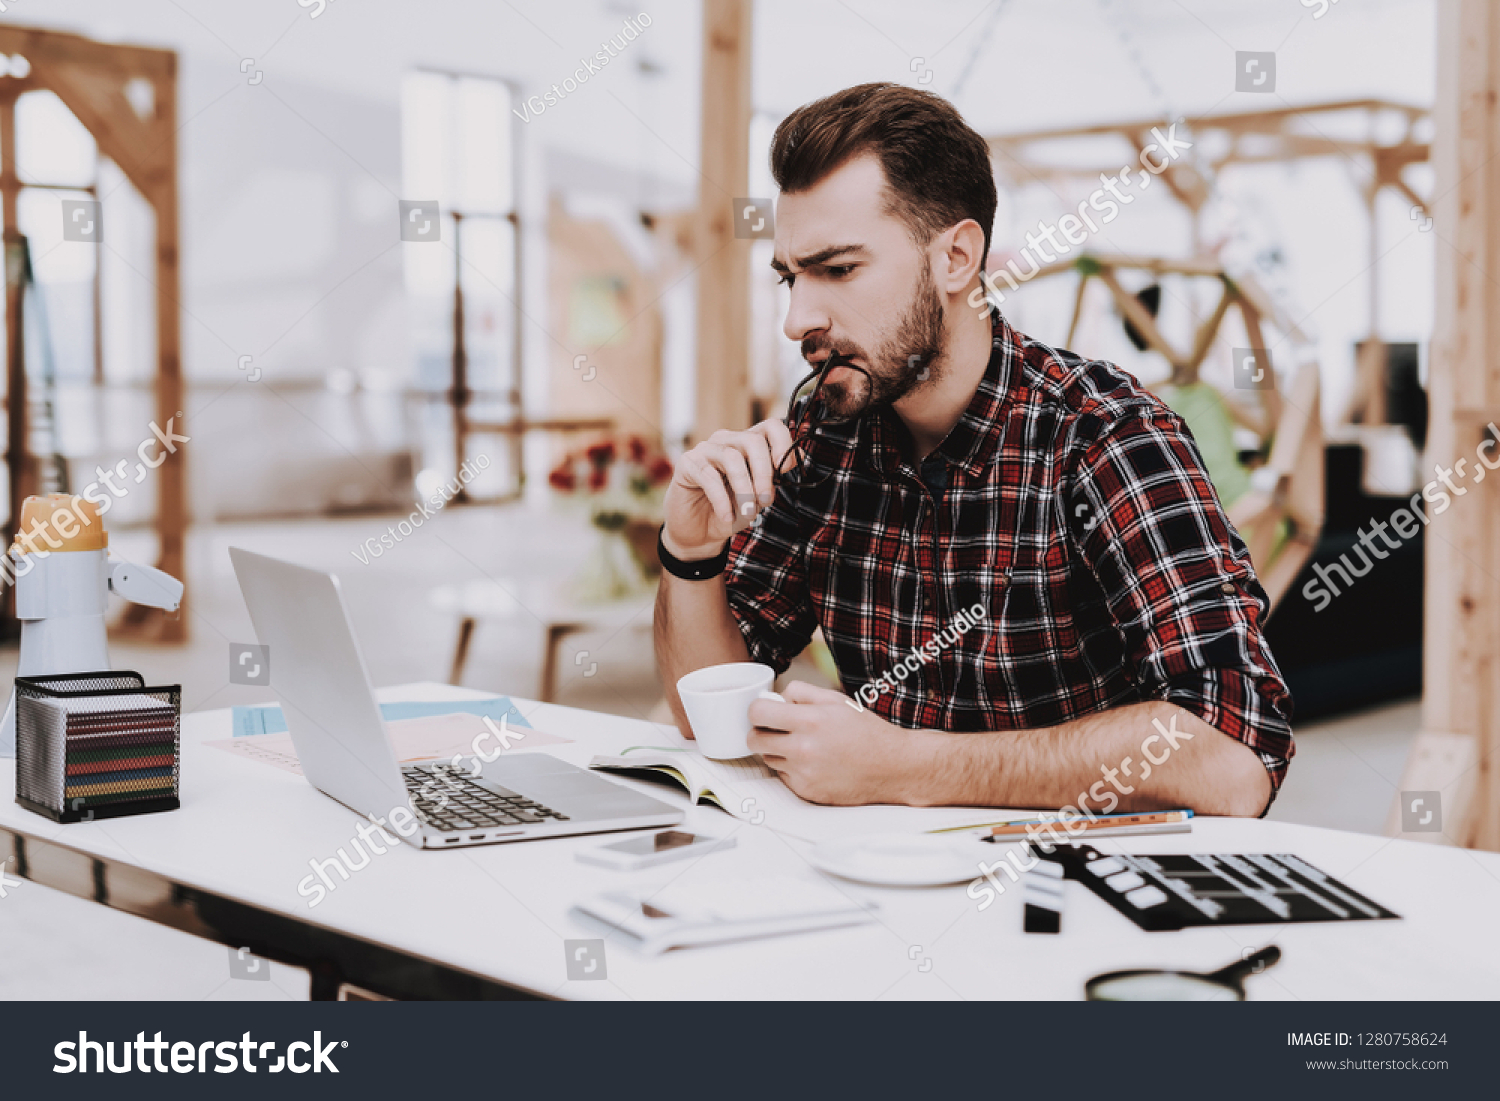 Laptop Screen. Cup of Coffee. Desk. Workplace. Mobile Phone. Young Male. Businessman. Creative Worker. Creates Ideas. Project. Sit. Brainstorm. Work. Office. Creative Worker. Inspiration. Eyeglasses. #1280758624